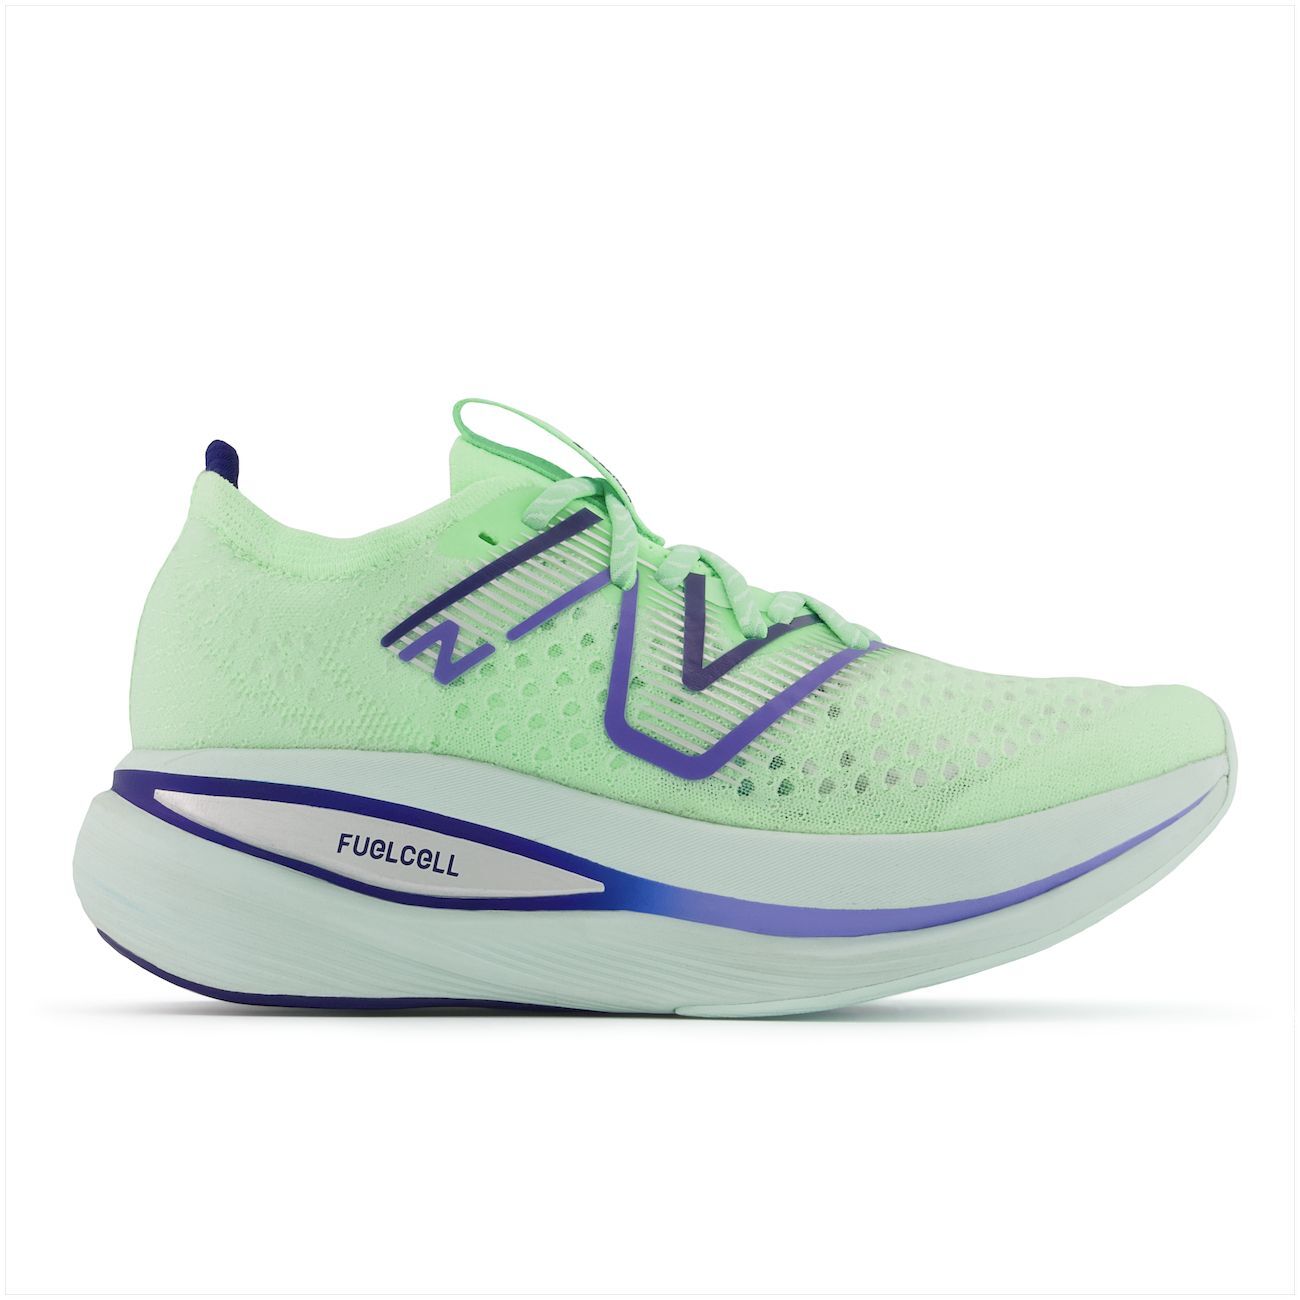 New Balance Fuelcell Supercomp Trainer - Chaussures running femme | Hardloop